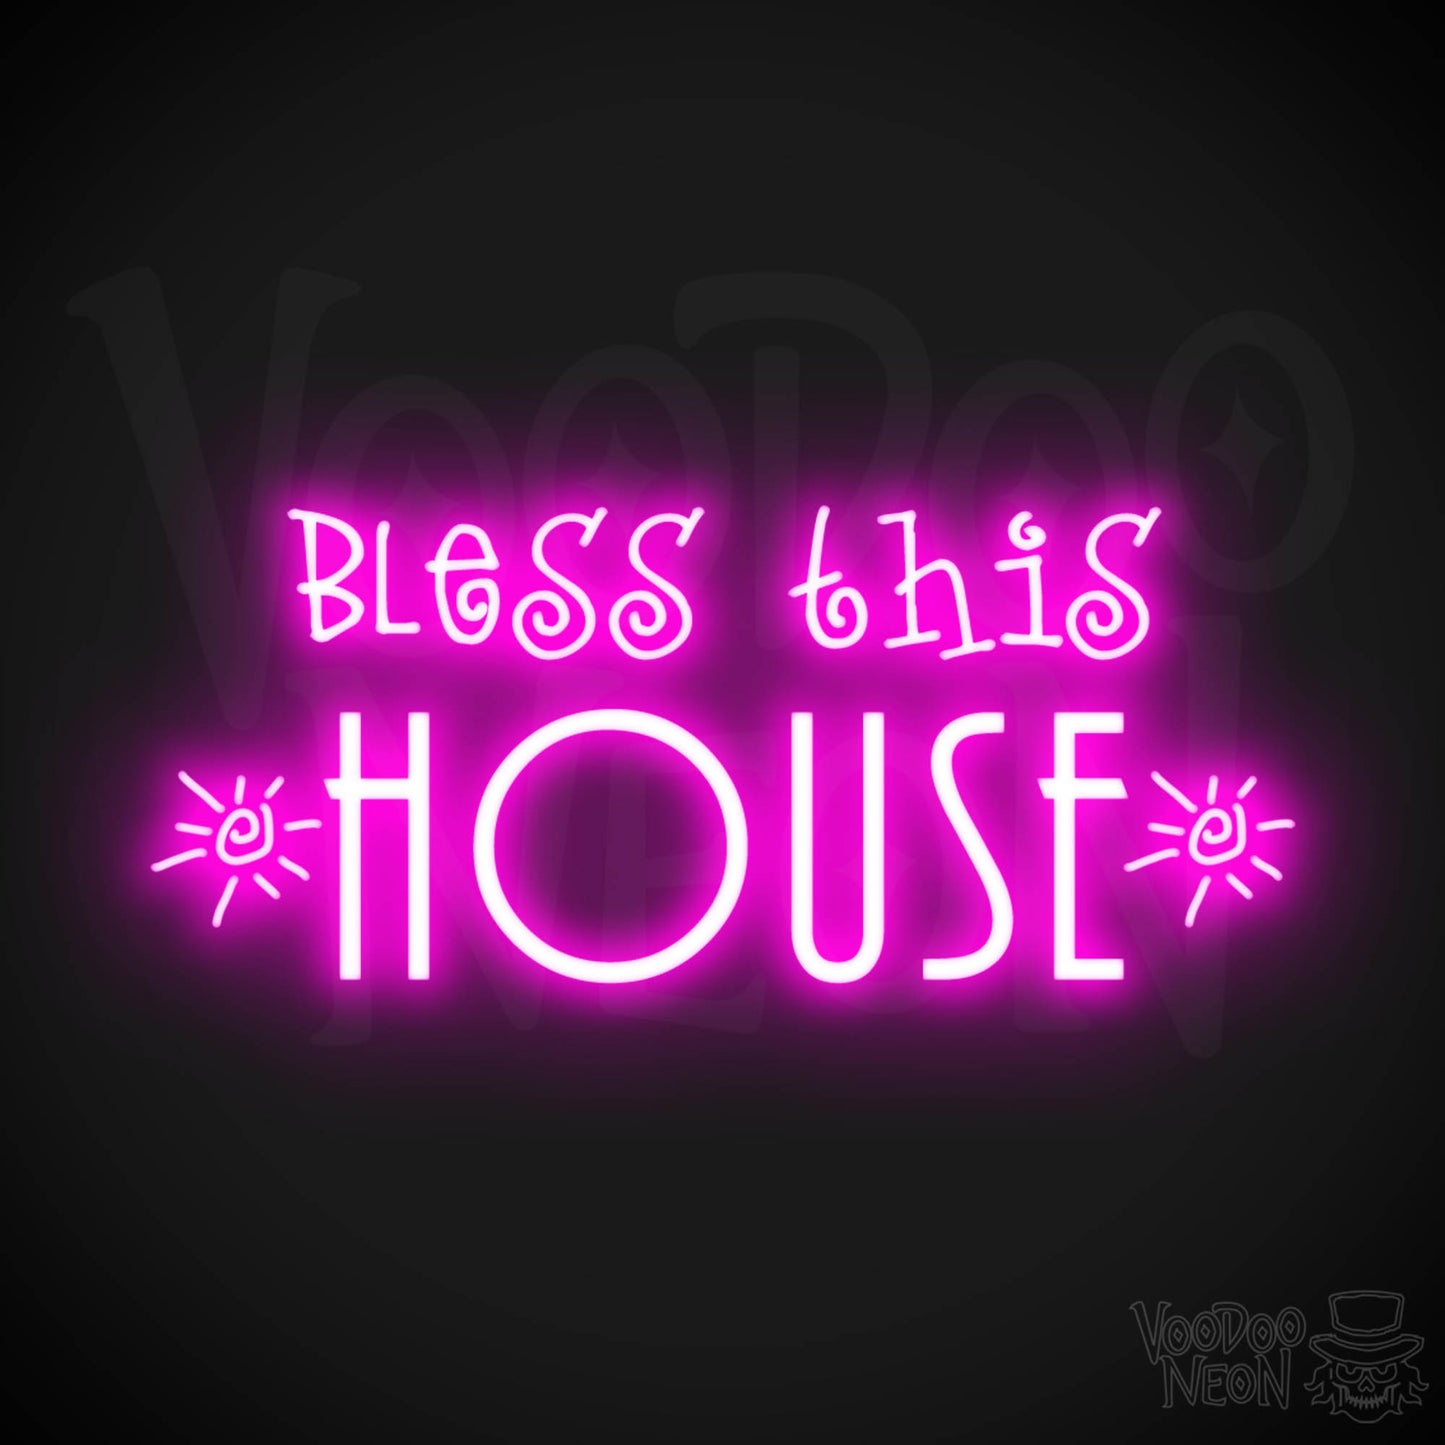 Bless This House Neon Sign - Neon Bless This House Sign - LED Light Up Sign - Color Pink